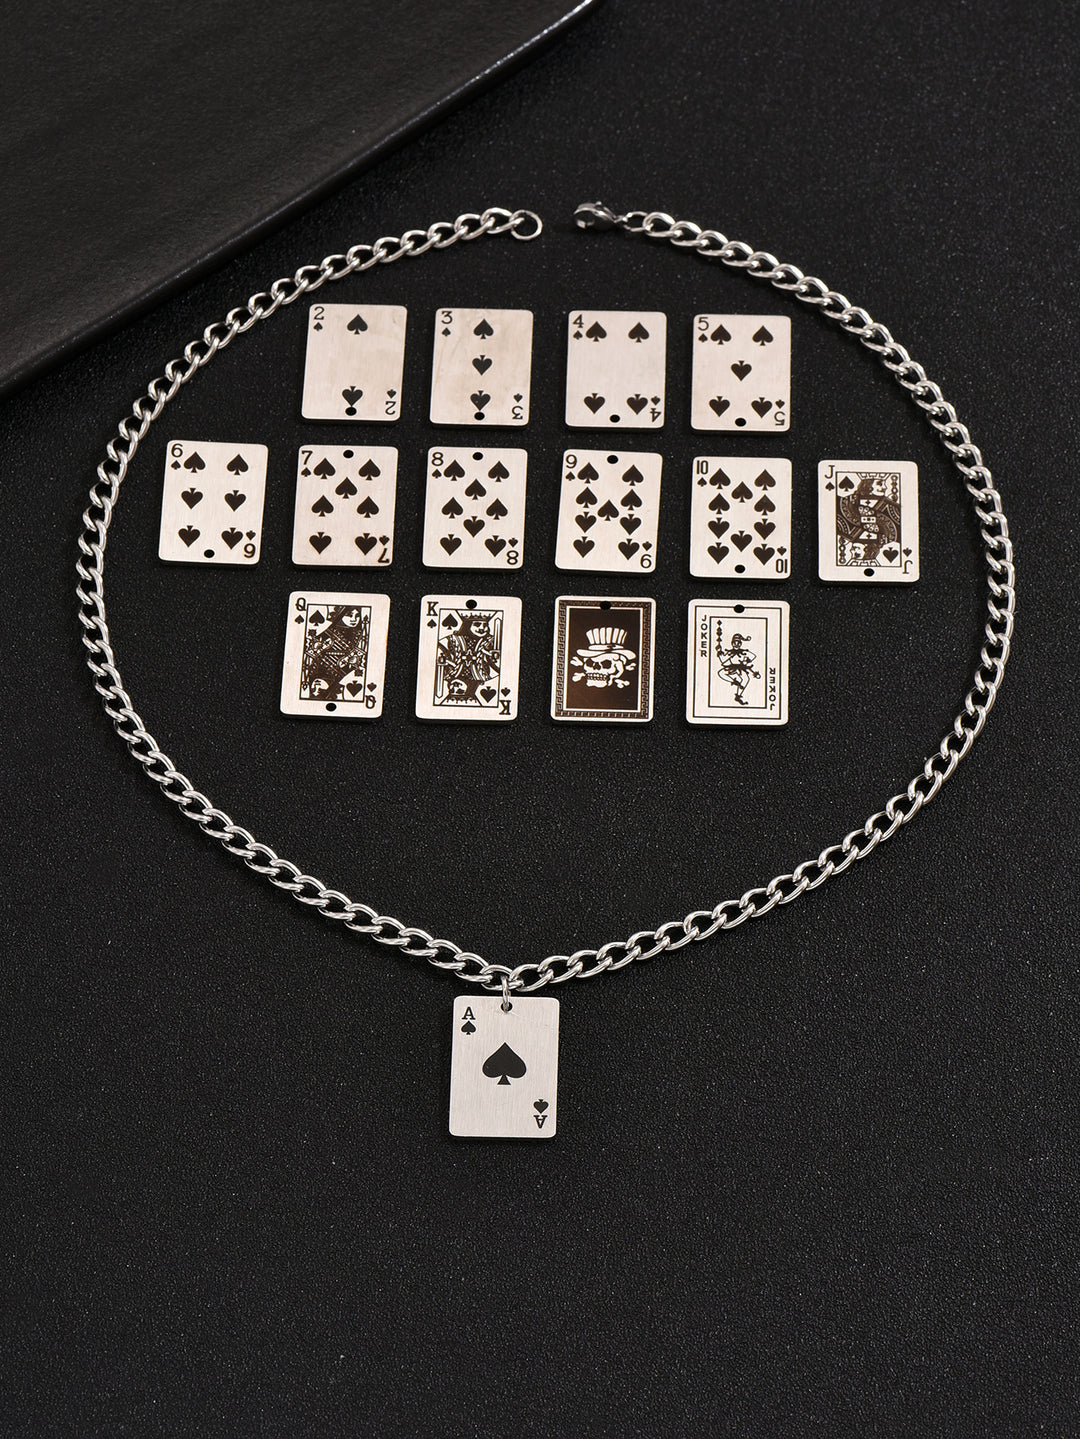 Creative Stainless Steel Poker Black Peach A Necklace For Men